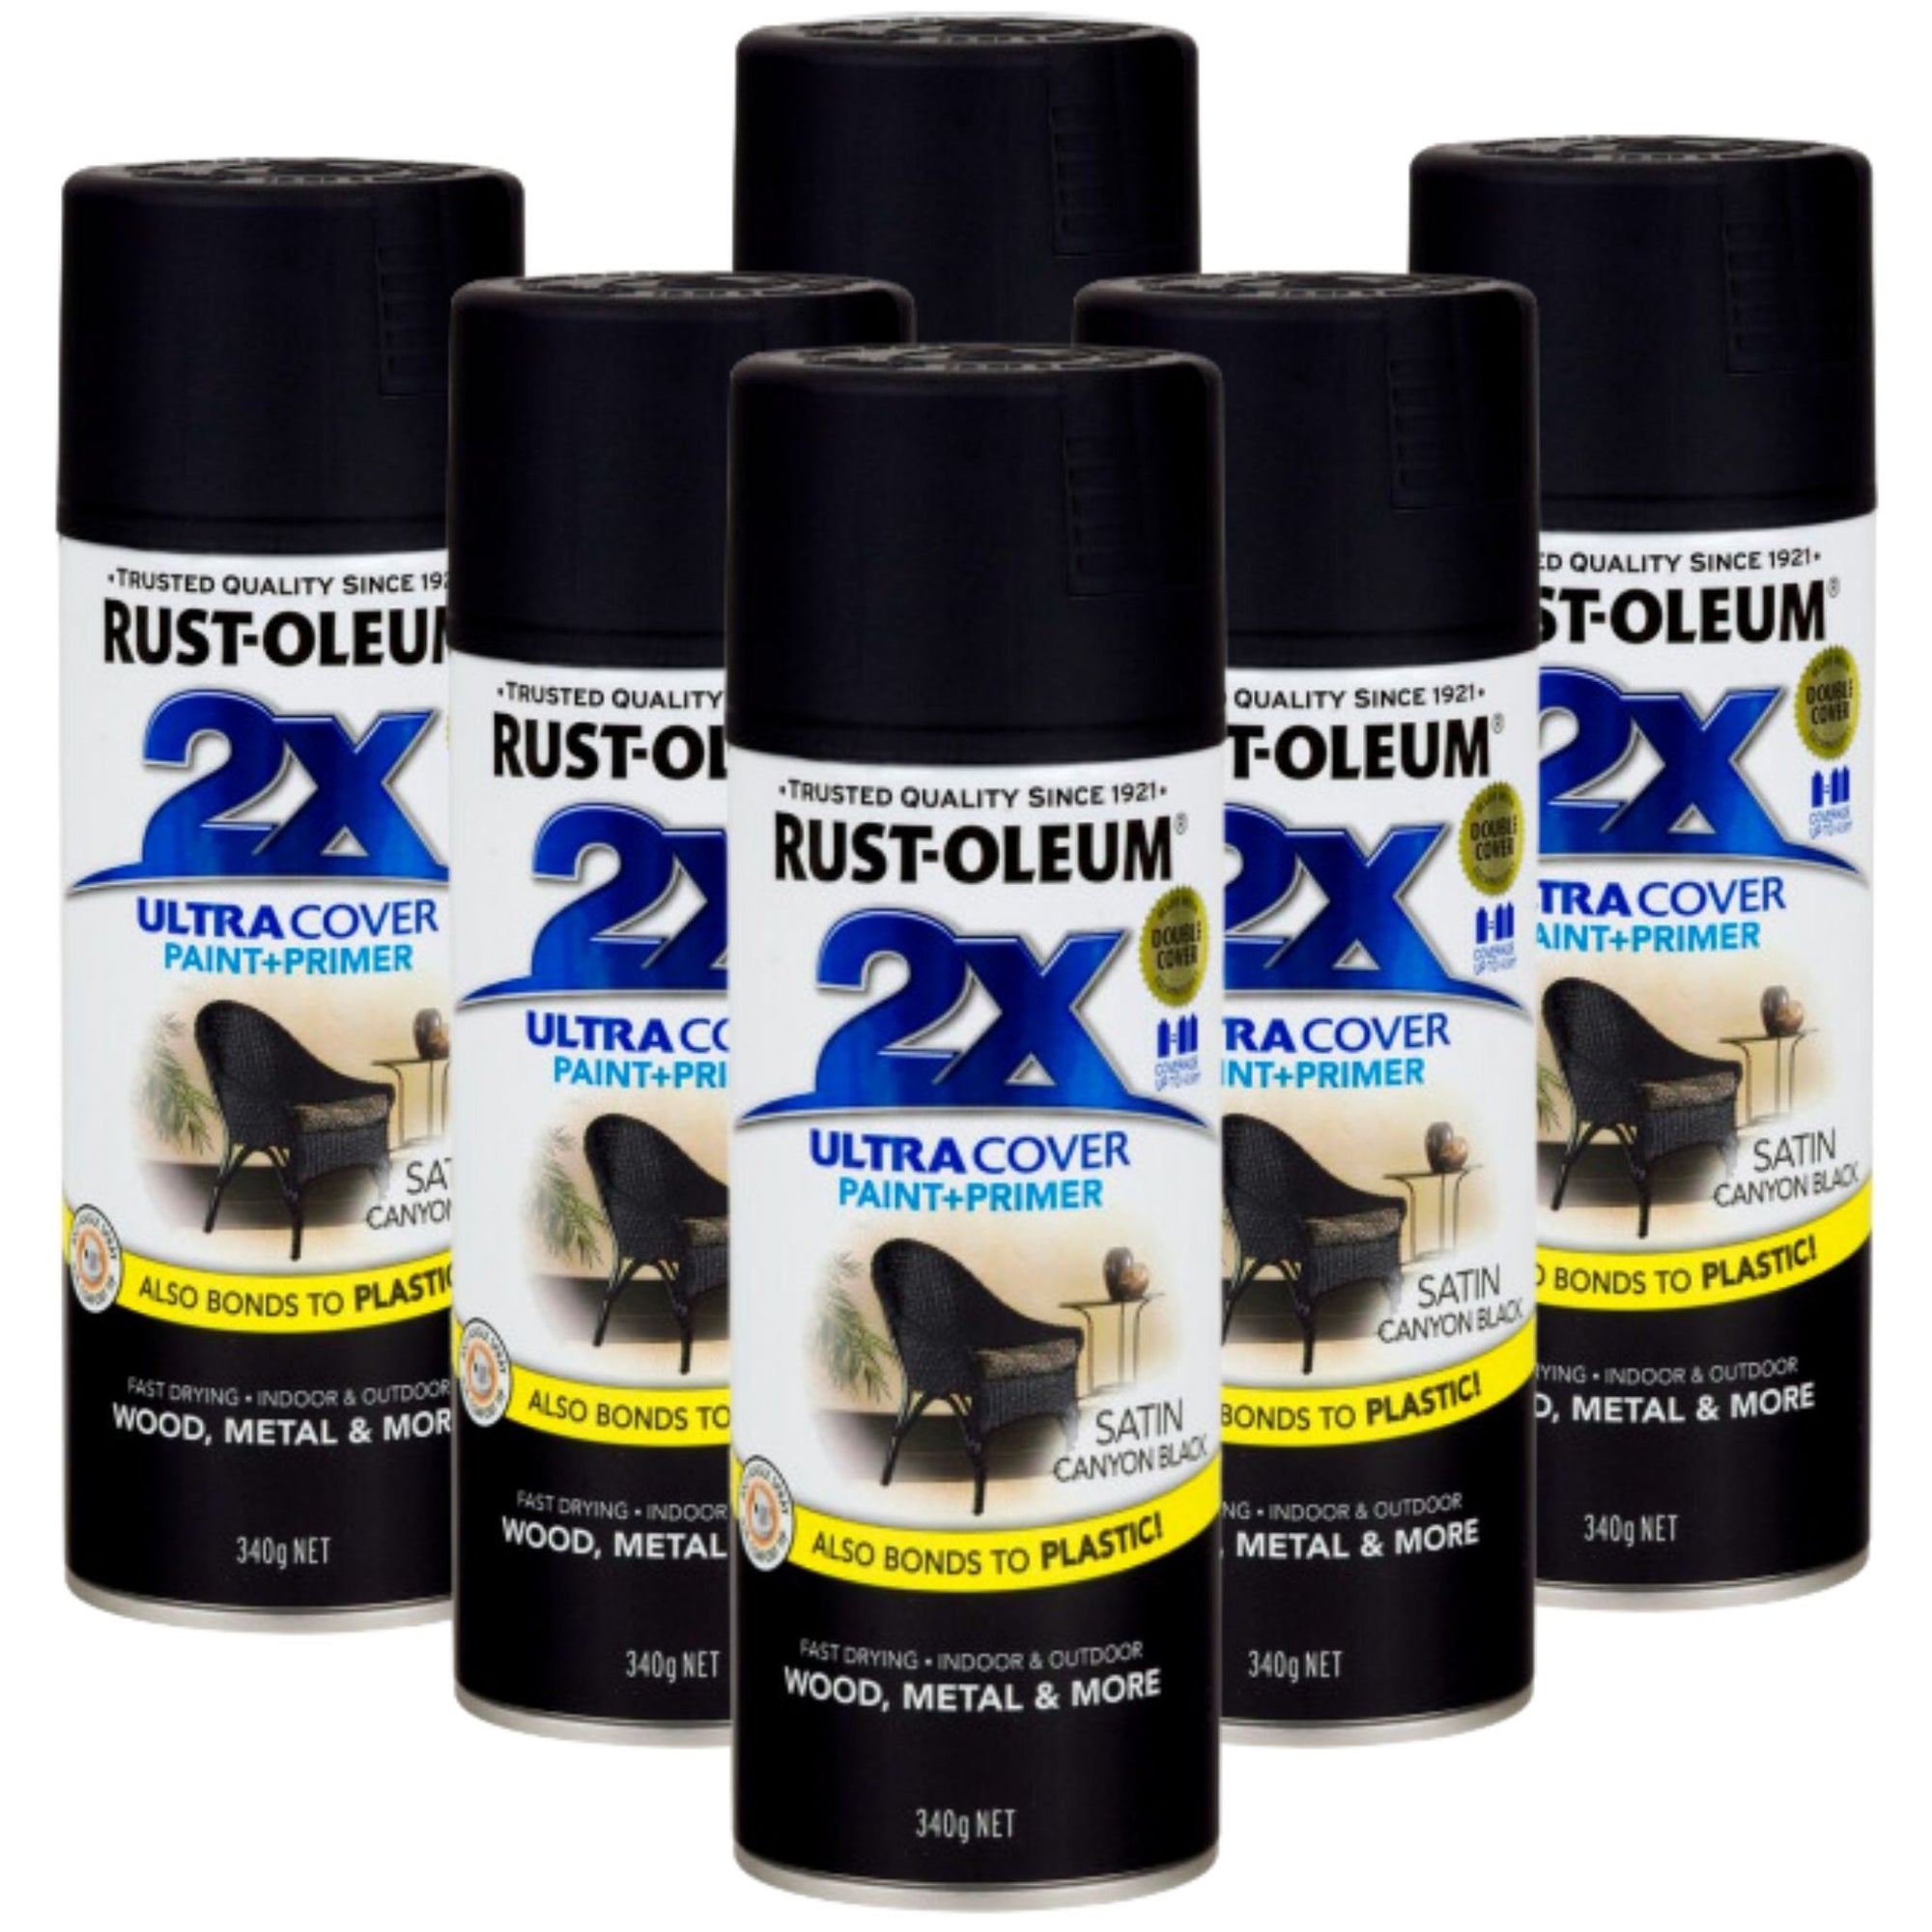 6 Cans | RUST-OLEUM 2X Gloss Paint & Primer Spray Paint 340g | 276317 Satin Canyon Black - South East Clearance Centre